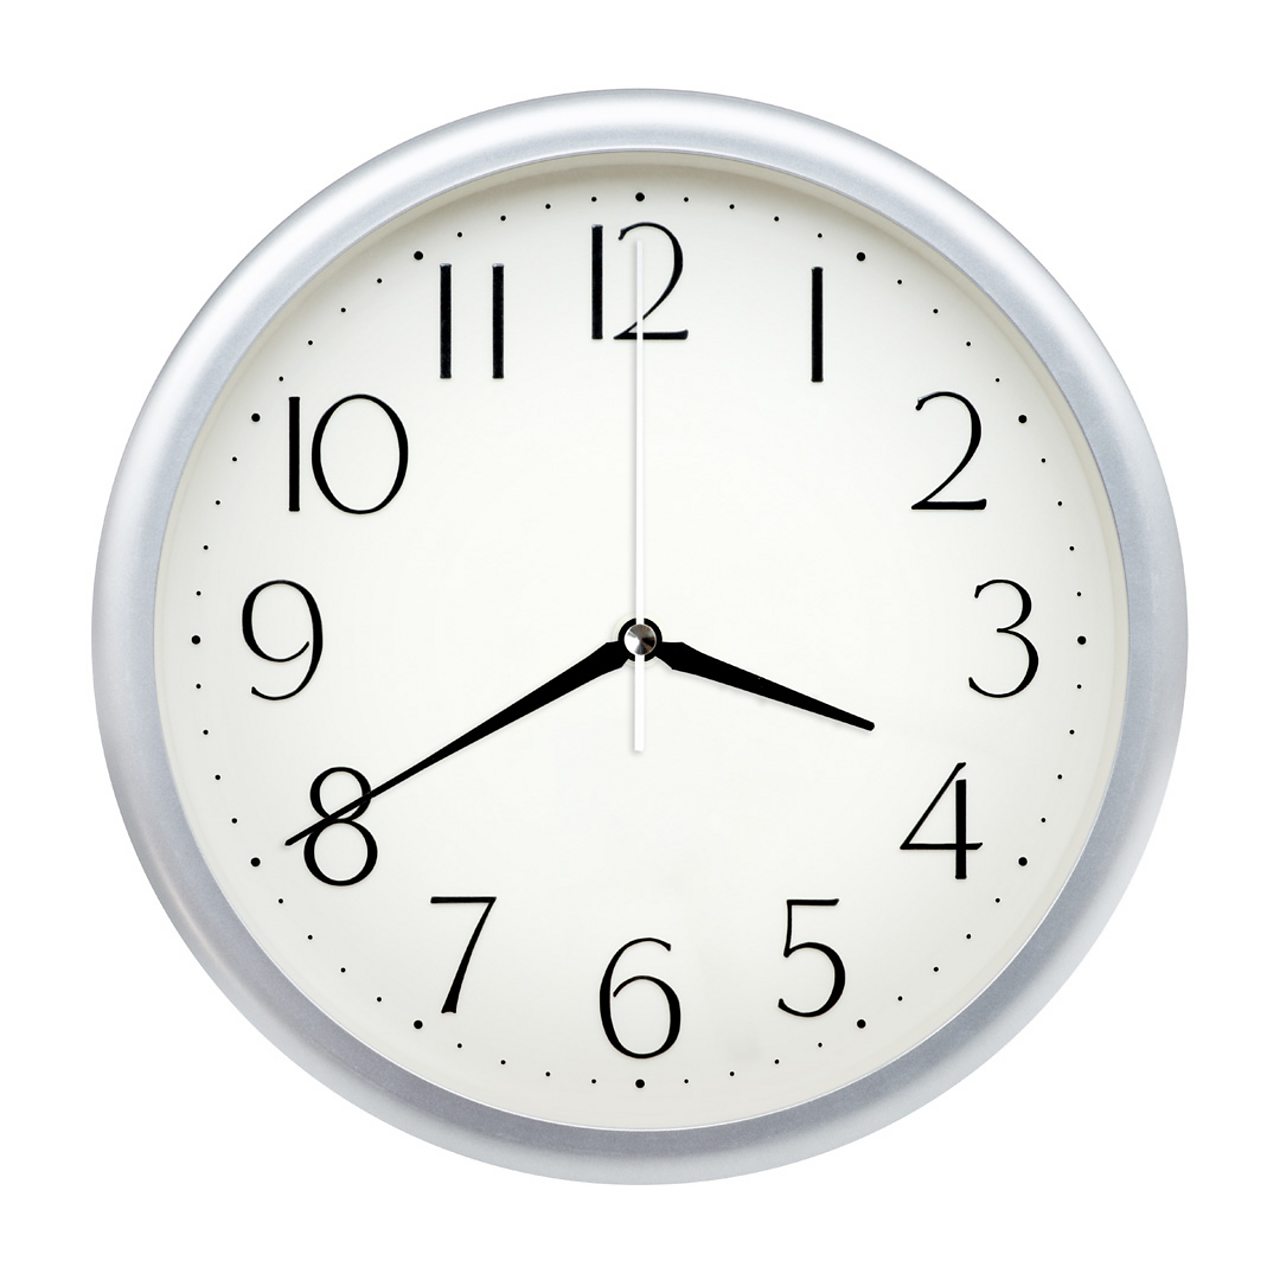 Image of a clock face showing 3.40